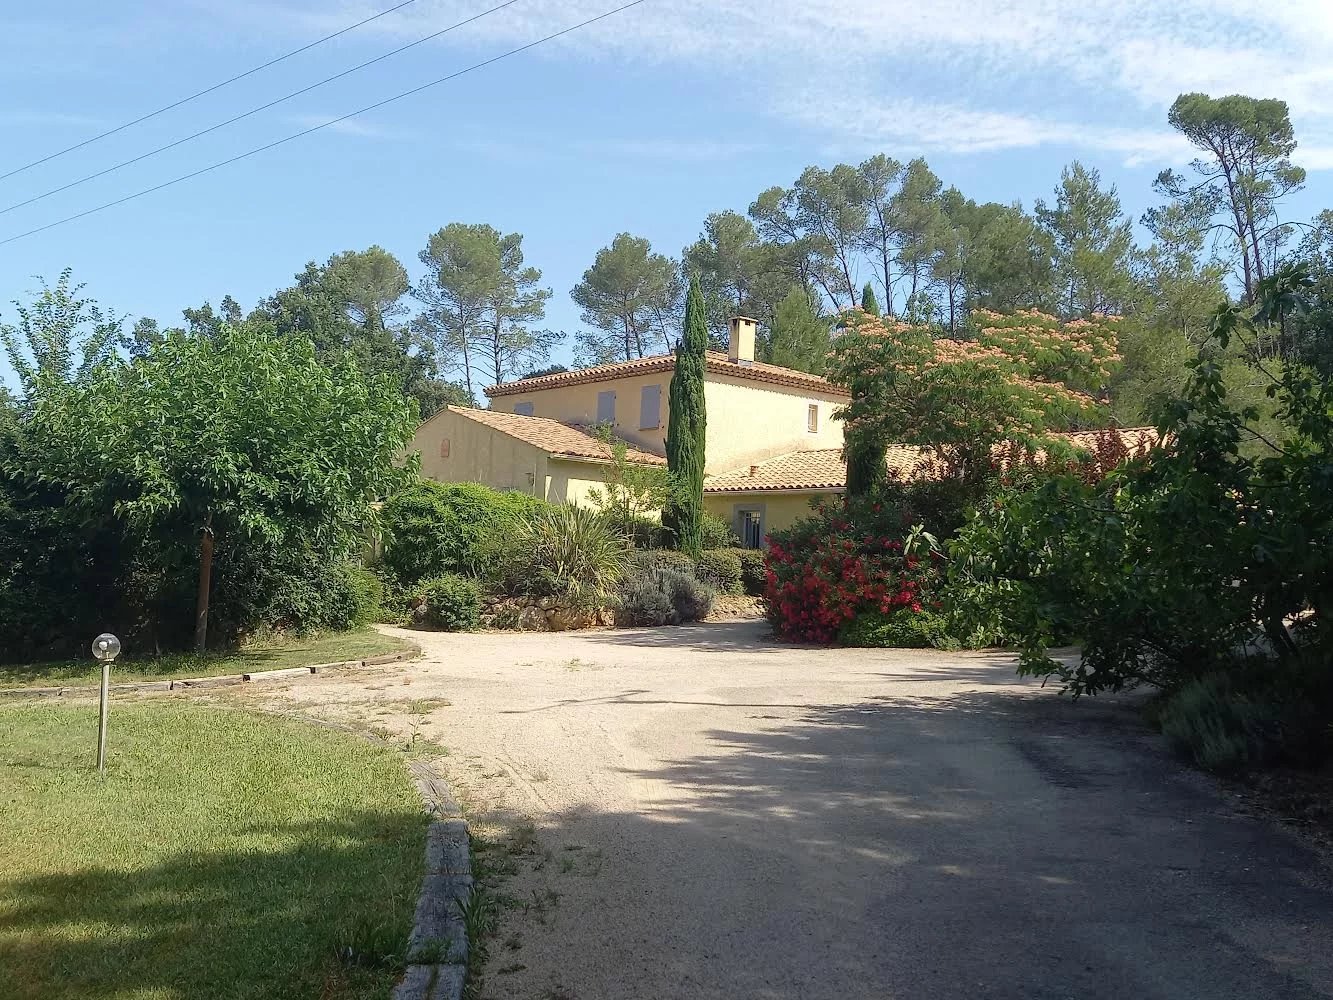 BRIGNOLES-Provençal Bastide style house with 6 bedrooms on 10,000m2